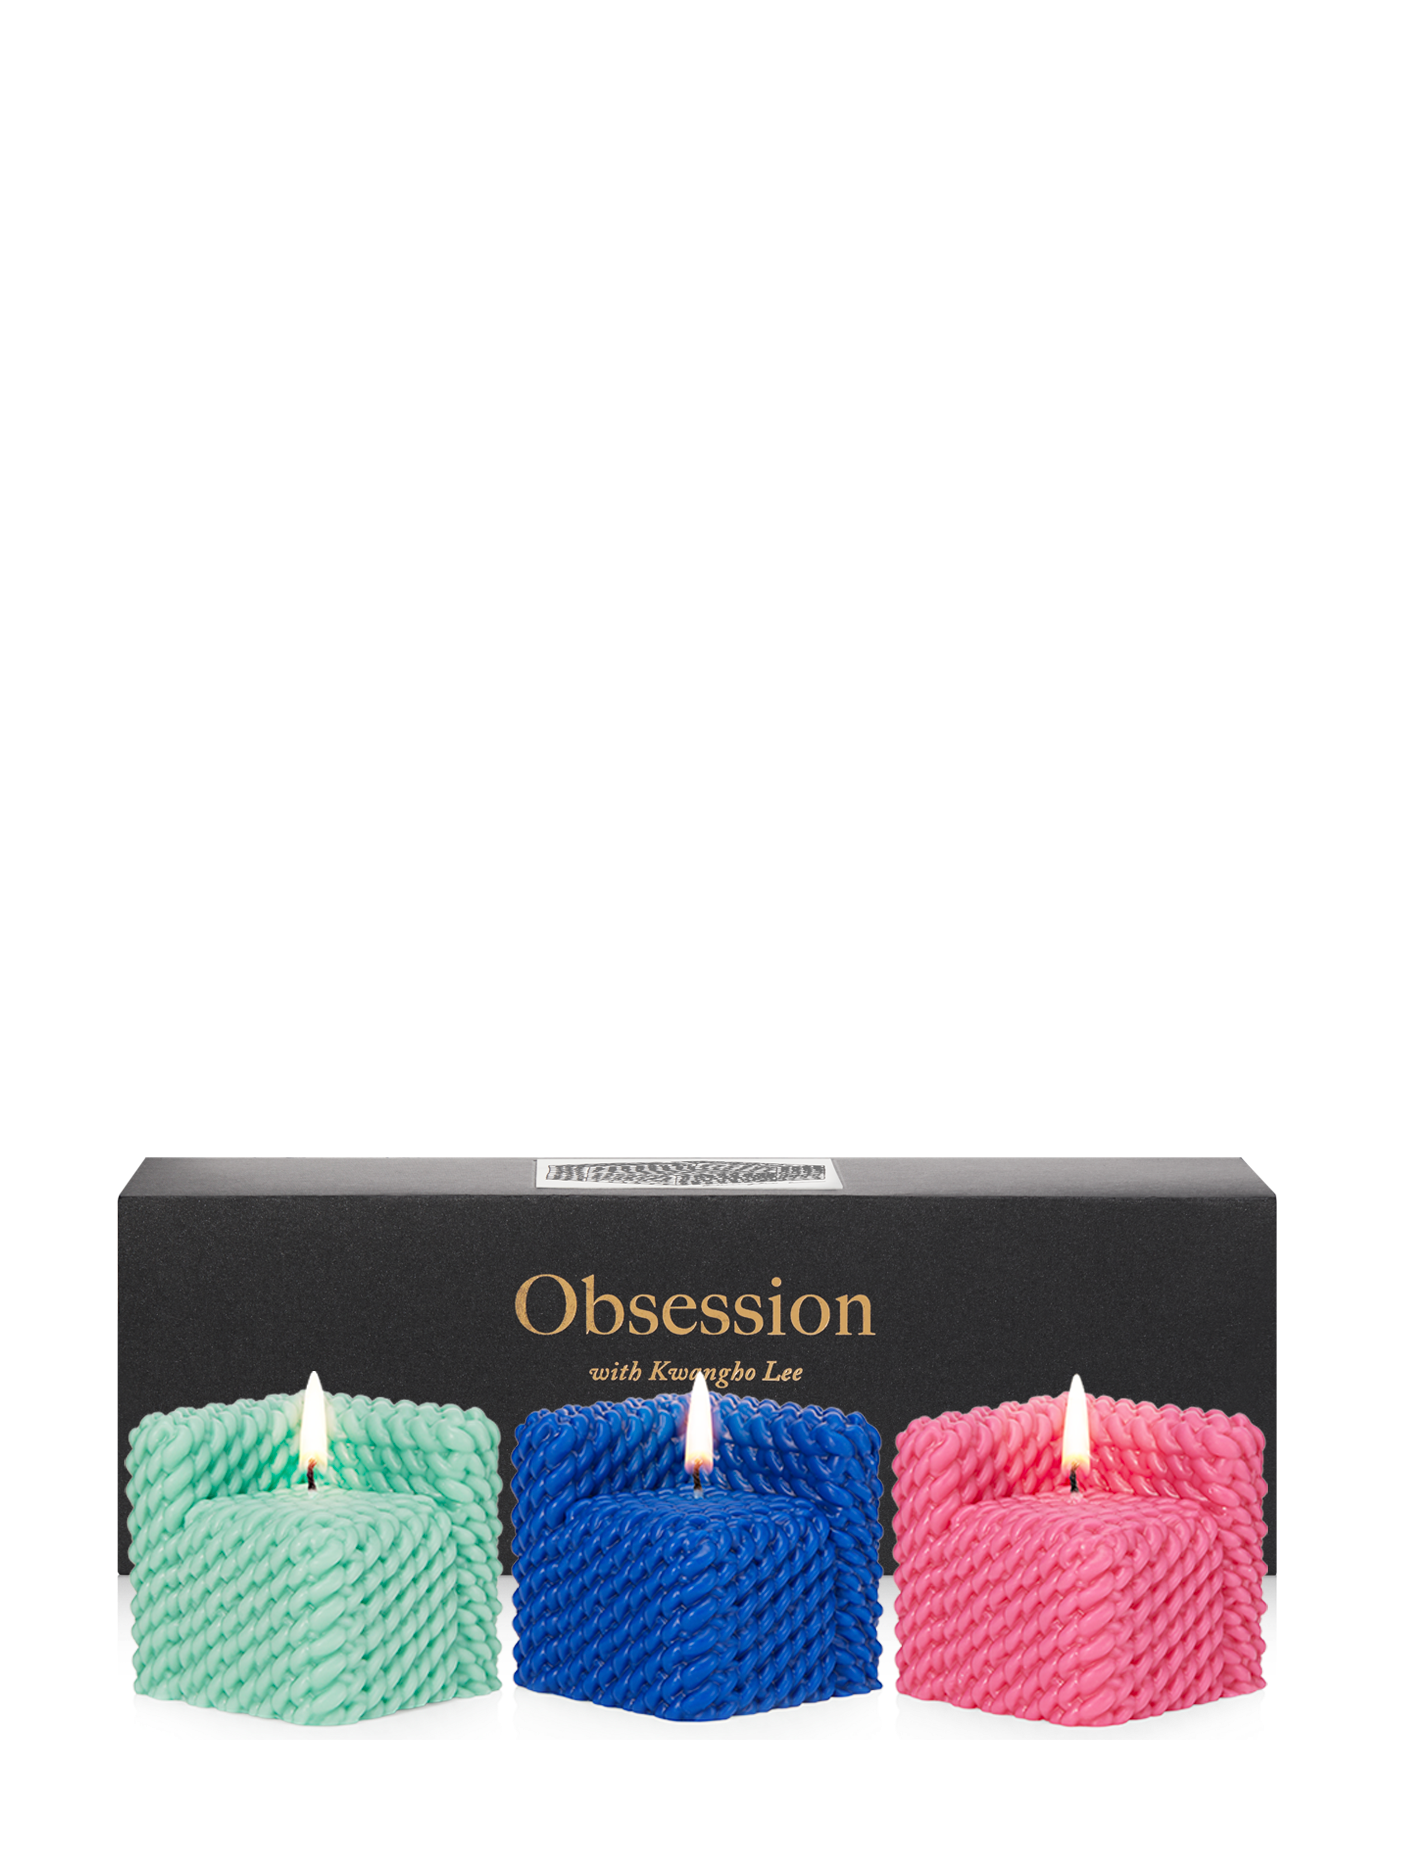 Obsession object candle set